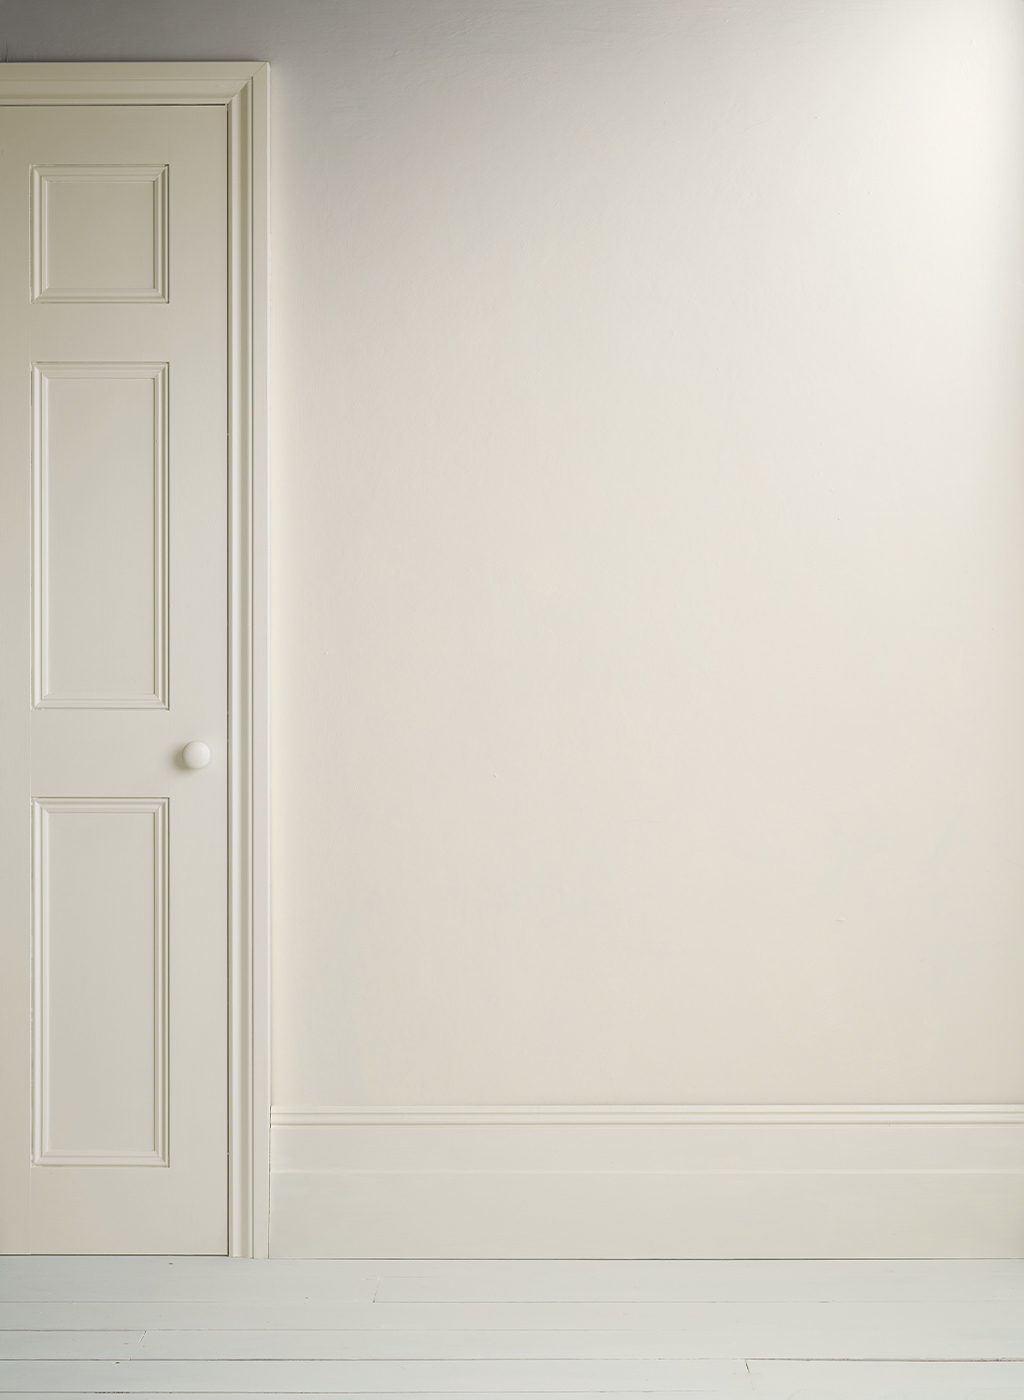 Lifestyle Image of Annie Sloan Satin Paint in Old White featuring painted door and skirting